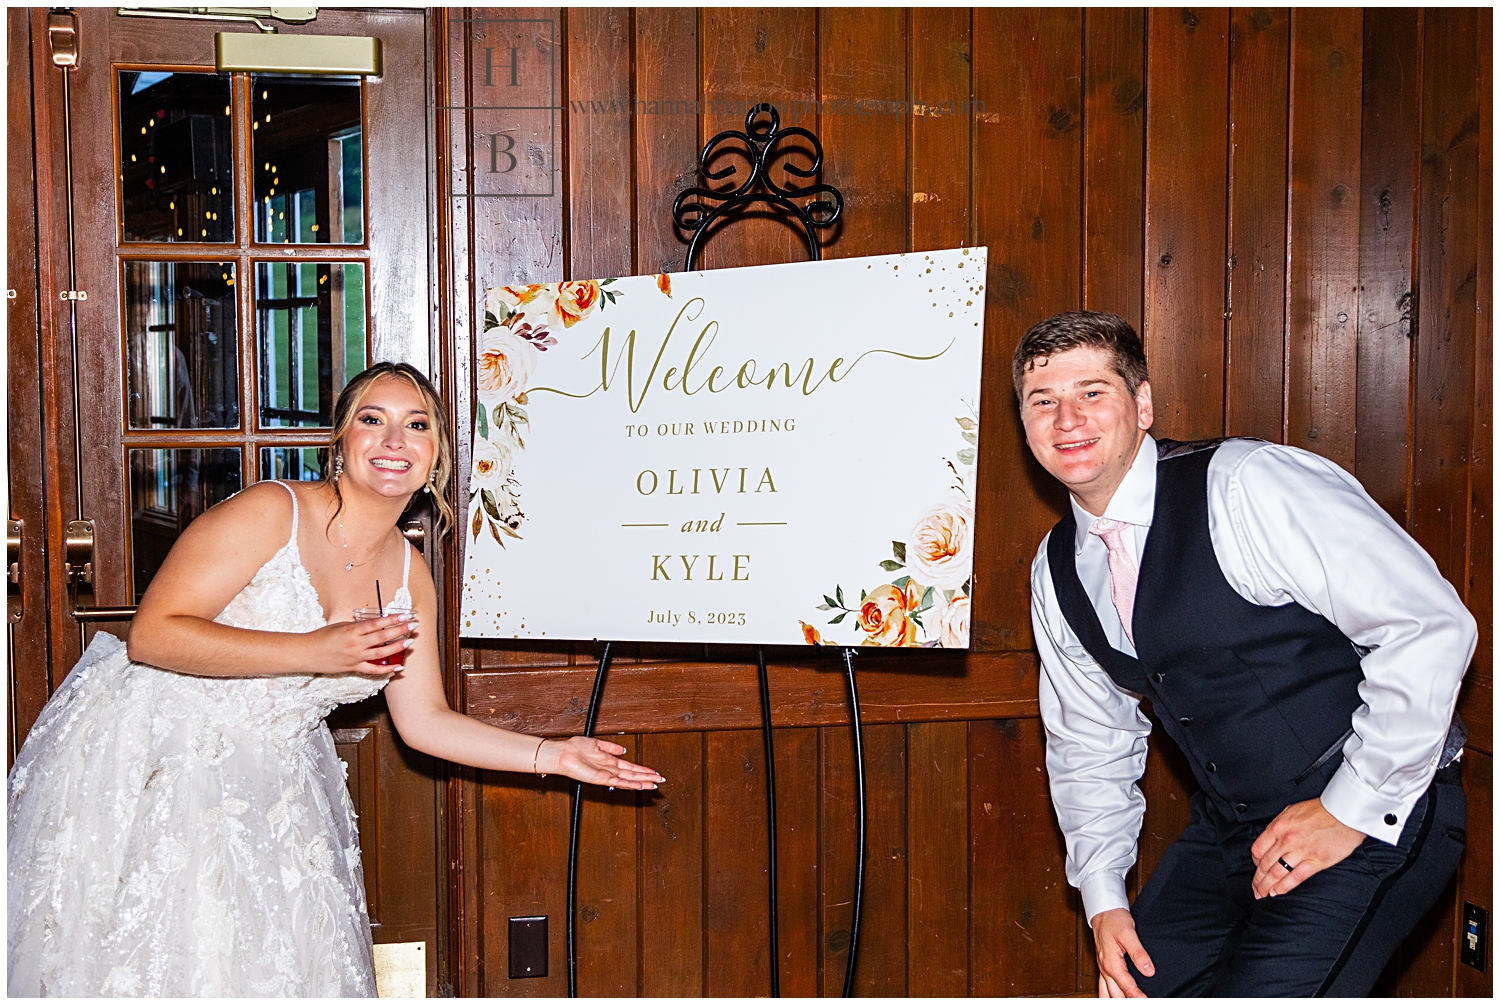 Bride and groom pose showing off wedding sign